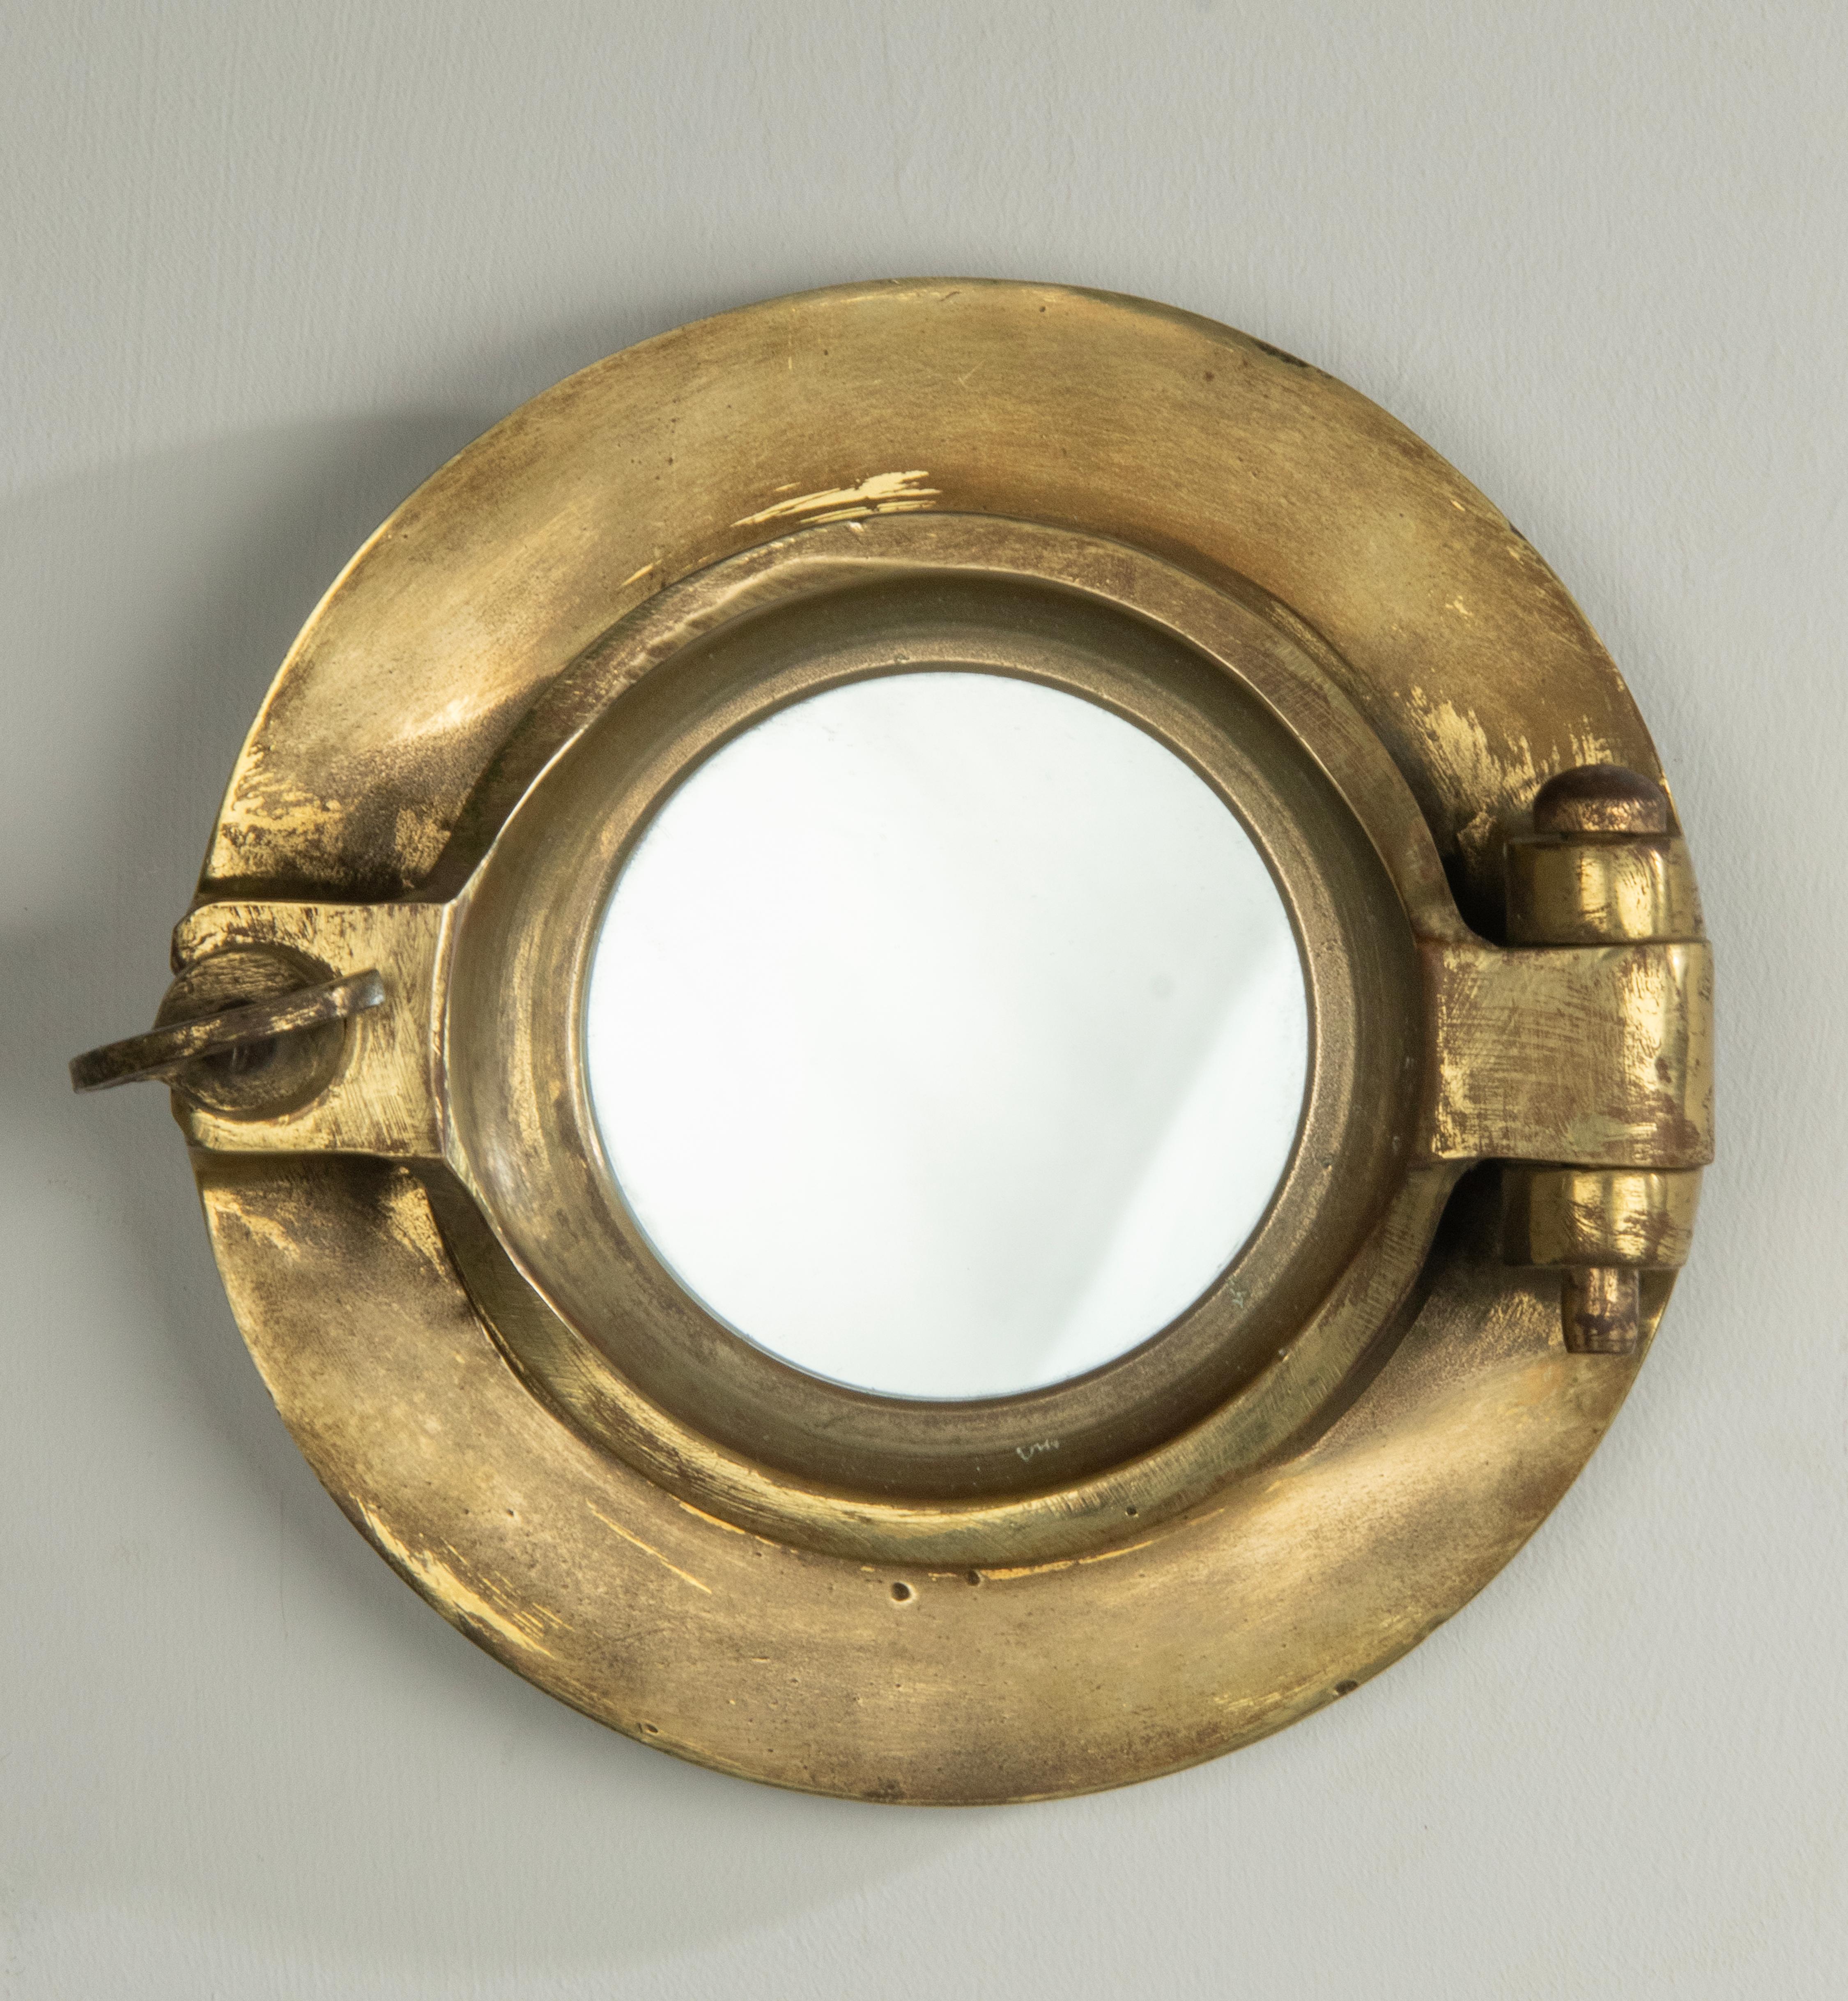 A small antique ship porthole wall mirror made of brass. A mirror glass has been placed inside. The whole has a beautiful old patina. The original glass is removed and replaced by a mirror glass. This maritime object was made around 1910-1930,